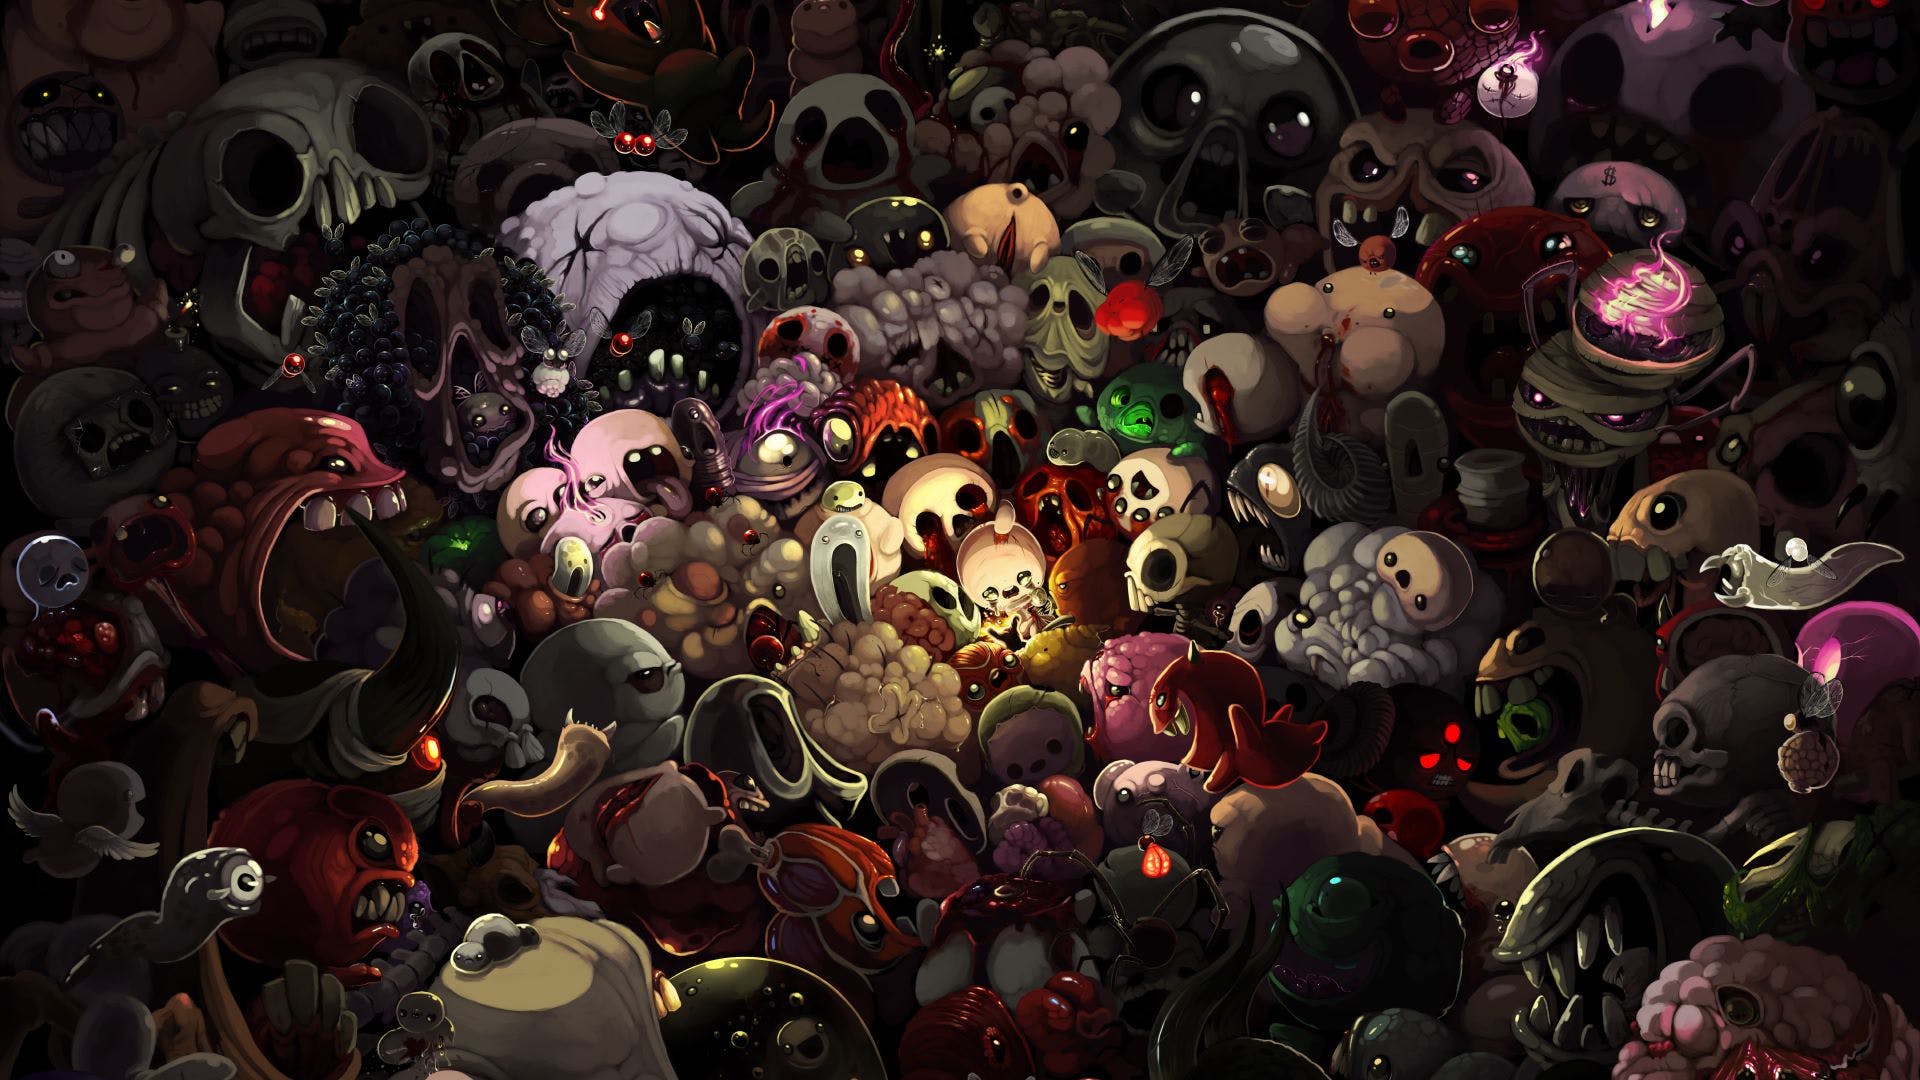 download isaac the binding of isaac for free